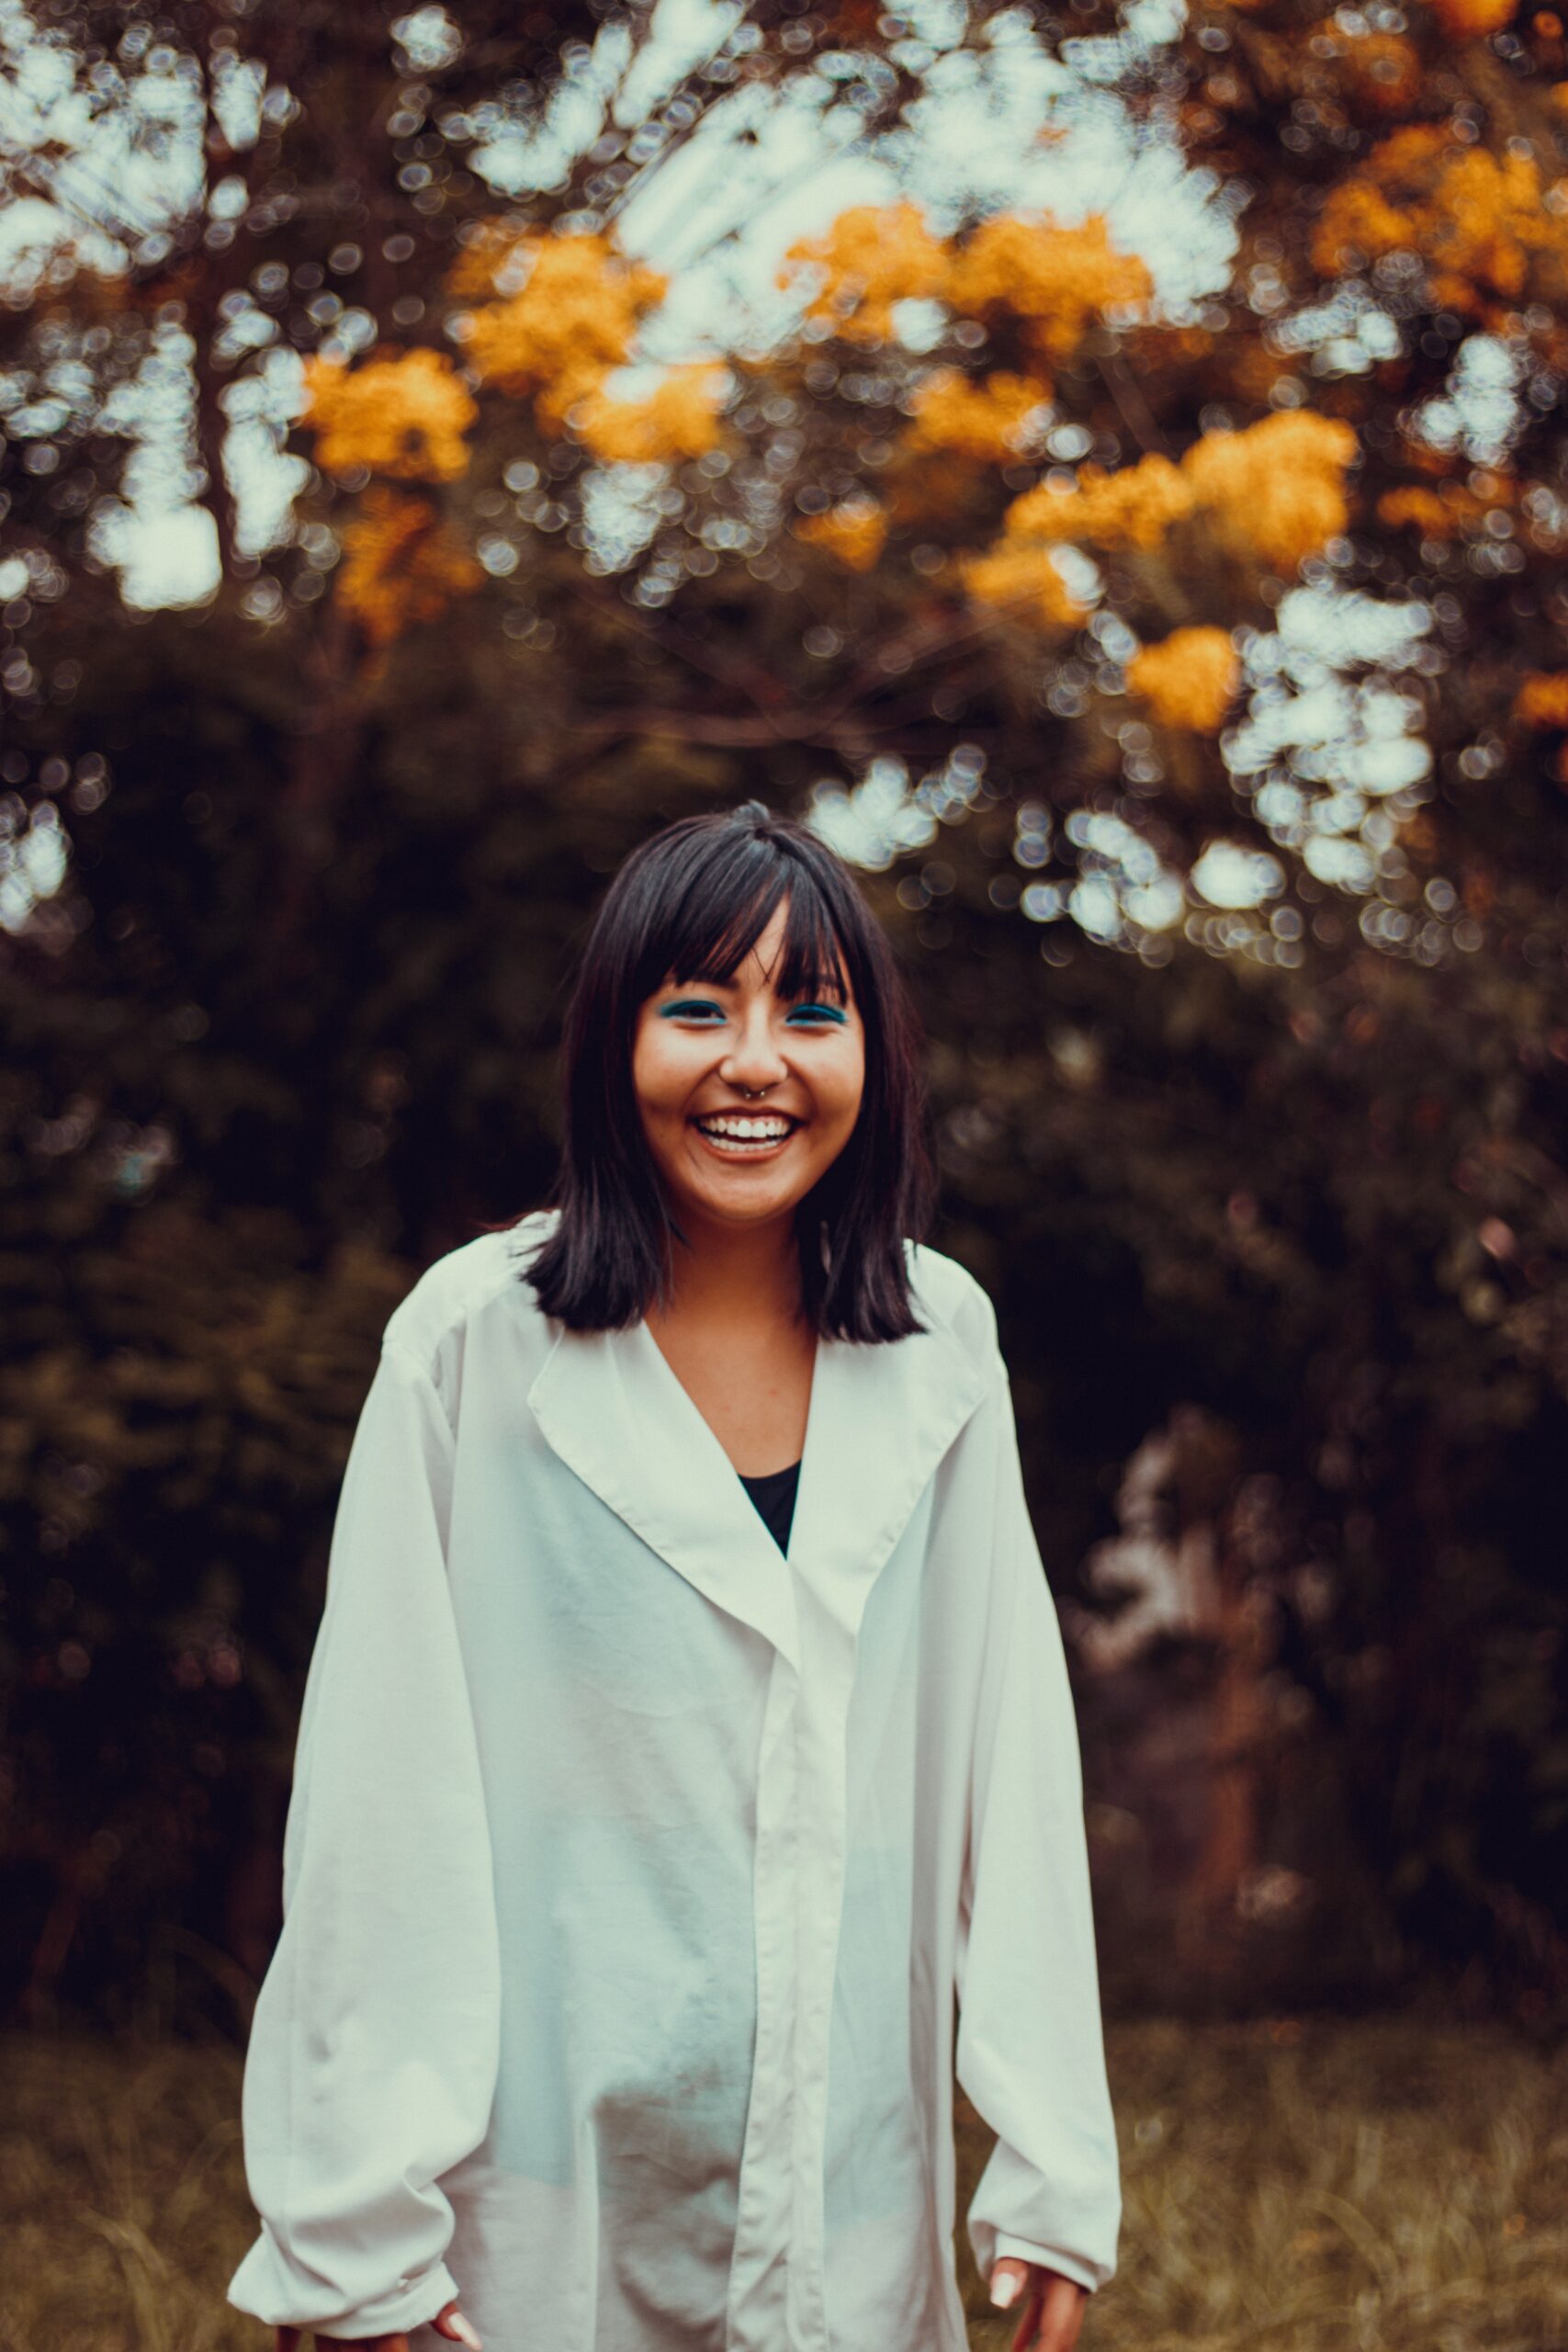 A person wearing a white blouse smiling at camera in a fall setting.